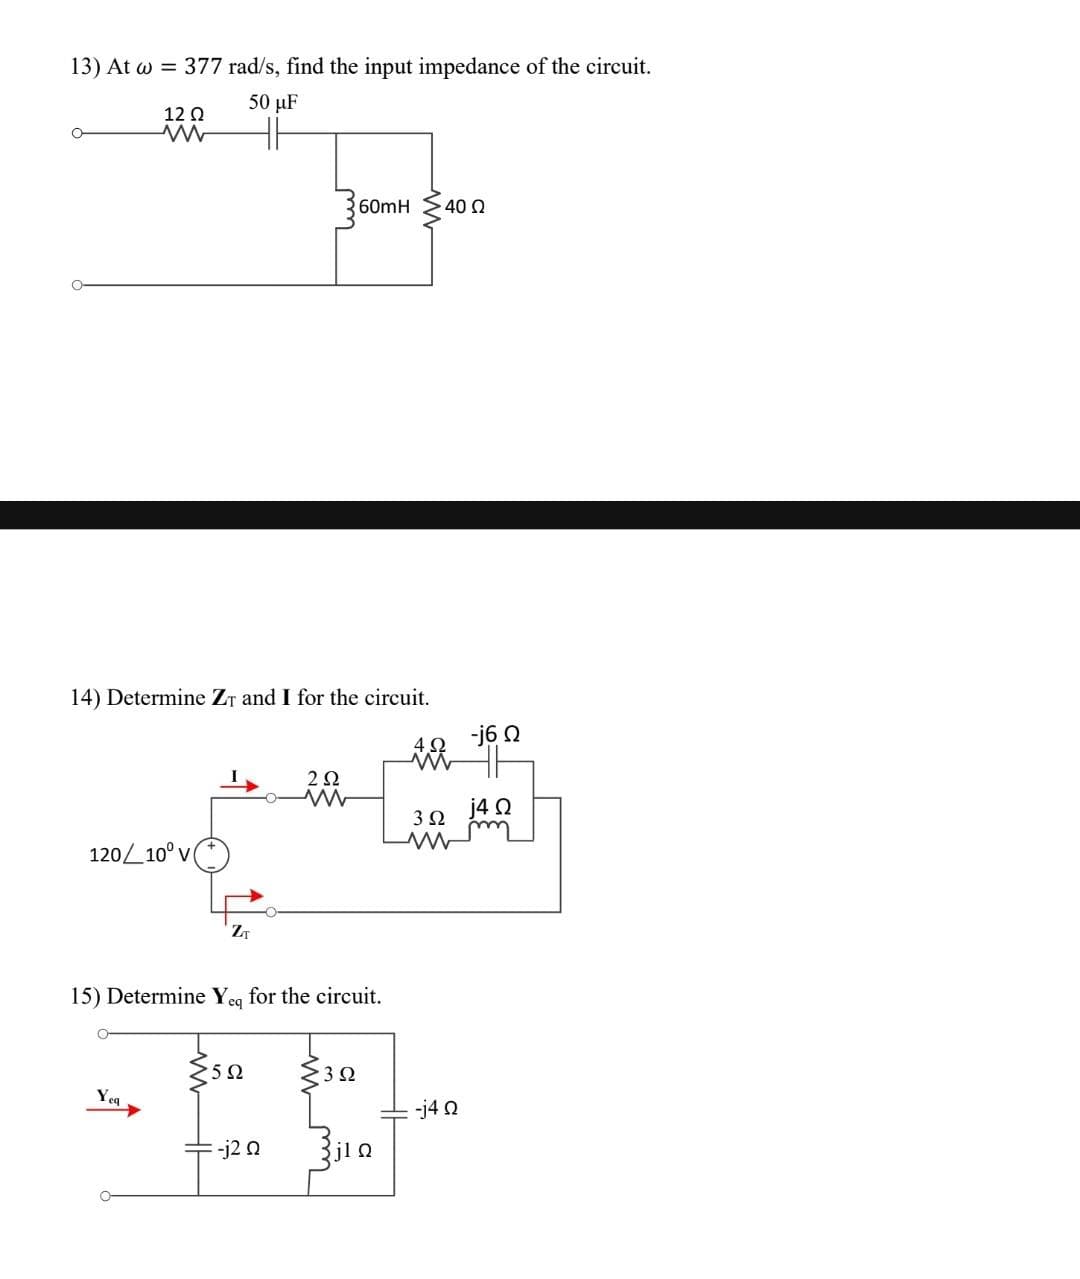 13) At ω = 377 rad/s, find the input impedance of the circuit.
50 με
12 Ω
α
14) Determine Zy and I for the circuit.
Α
και να
120/10°v
ZT
Yeq
αν ένας
60mH 40 Ω
15) Determine Yeq for the circuit.
Ο
5Ω
-j2 Ω
2Ω
>3 Ω
j1Ω
3 Ω
-j4 Ω
-j6 Ω
j4 Ω